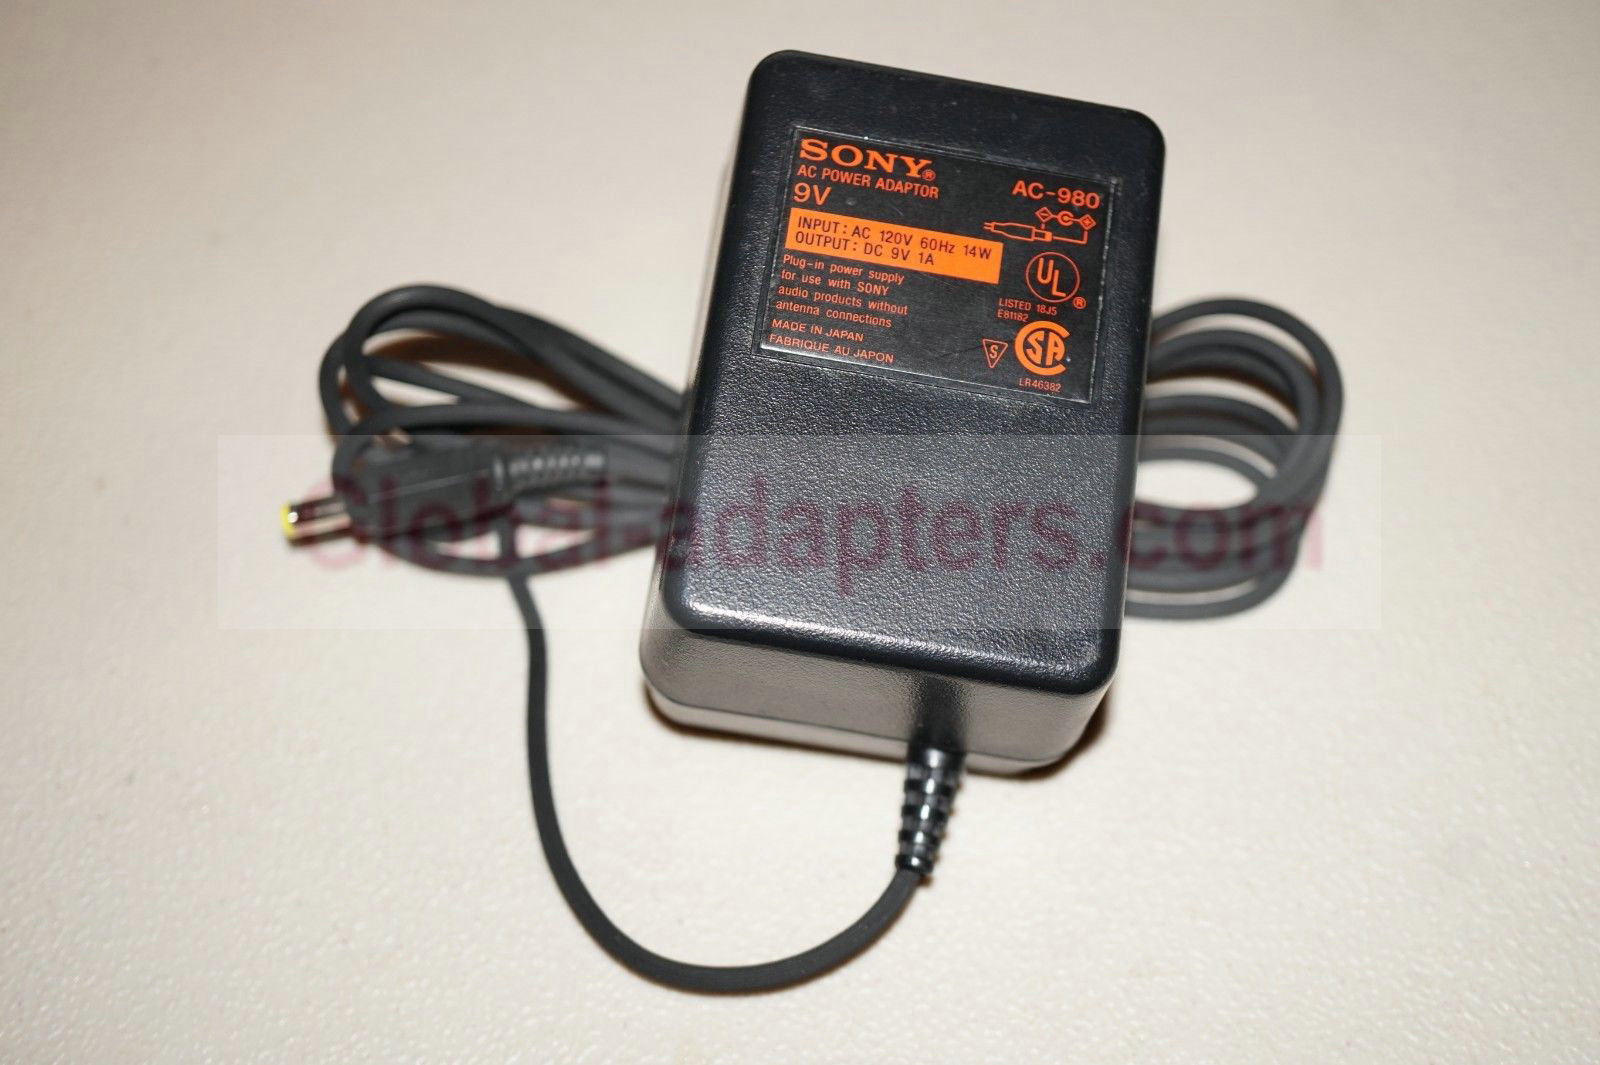 New 9V 1A Sony AC-980 AC Power Adapter - Click Image to Close